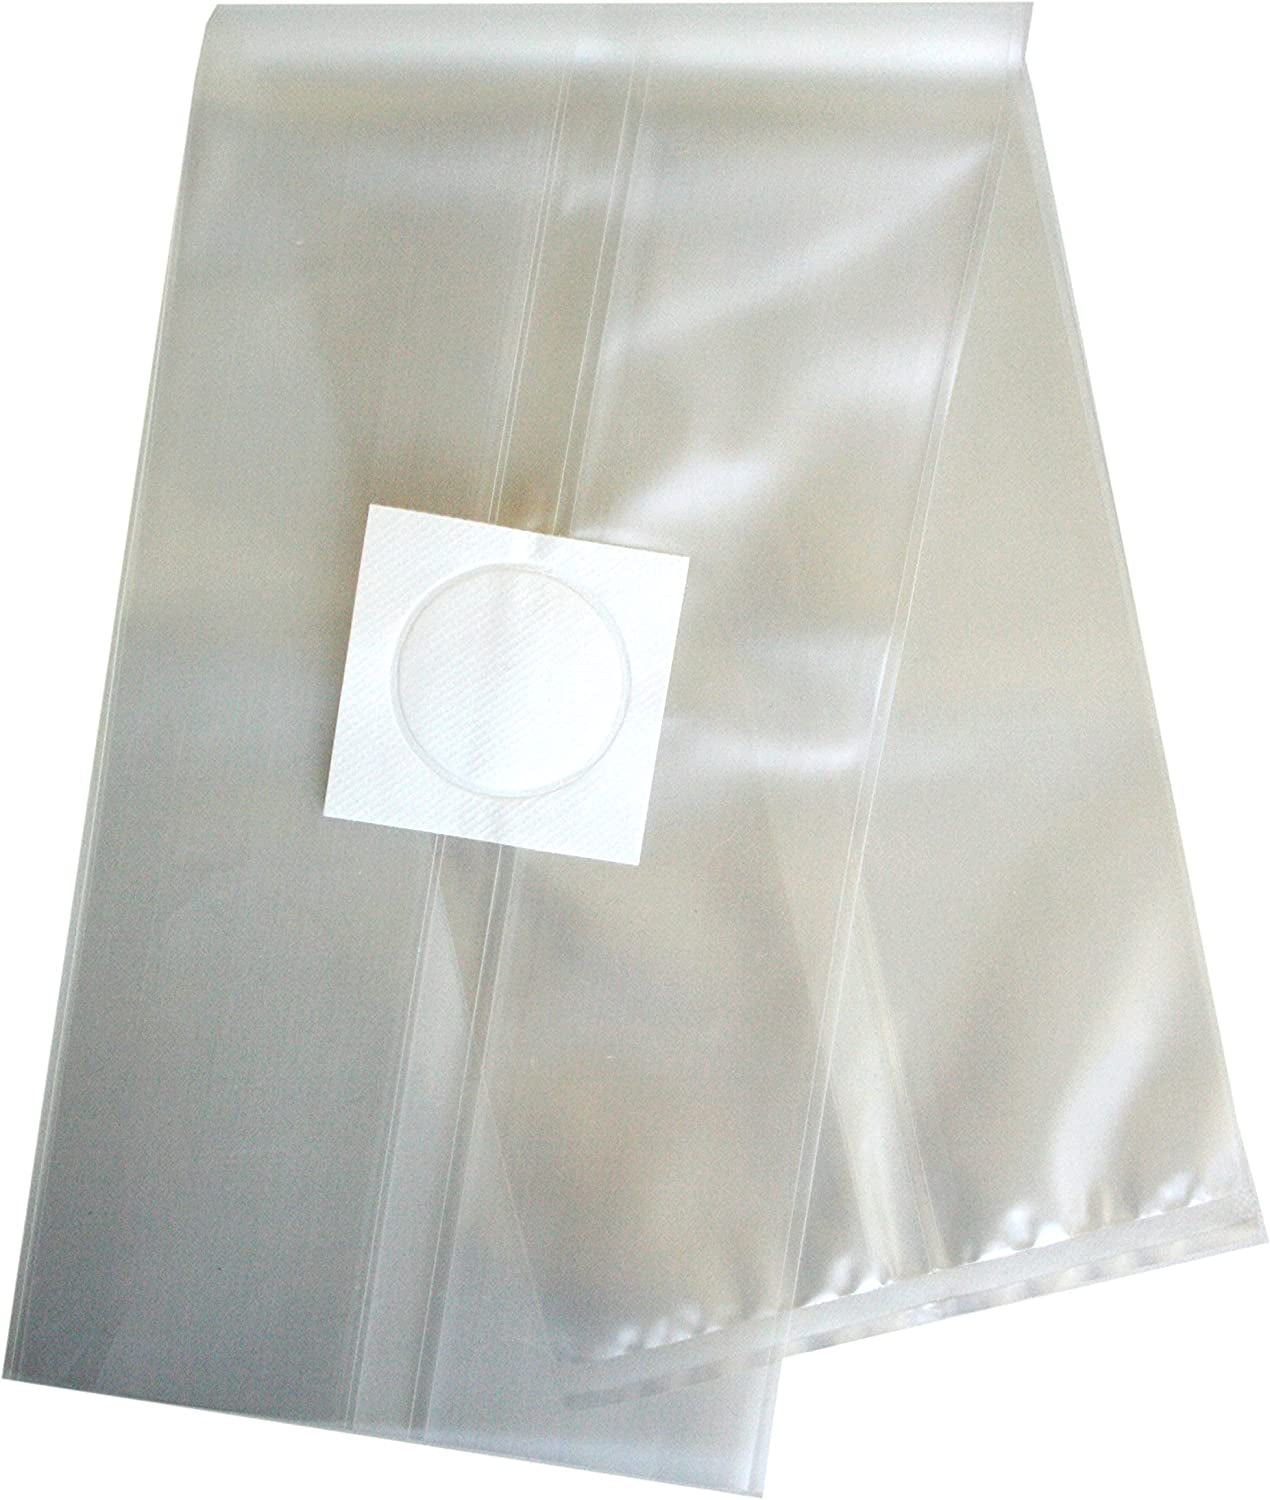 -Mushroom Growing Bags, 0.5 Micron Filter, 3 Mil Polypropylene, Large Size 8" X 5" X 19", Multiple Choices (50)